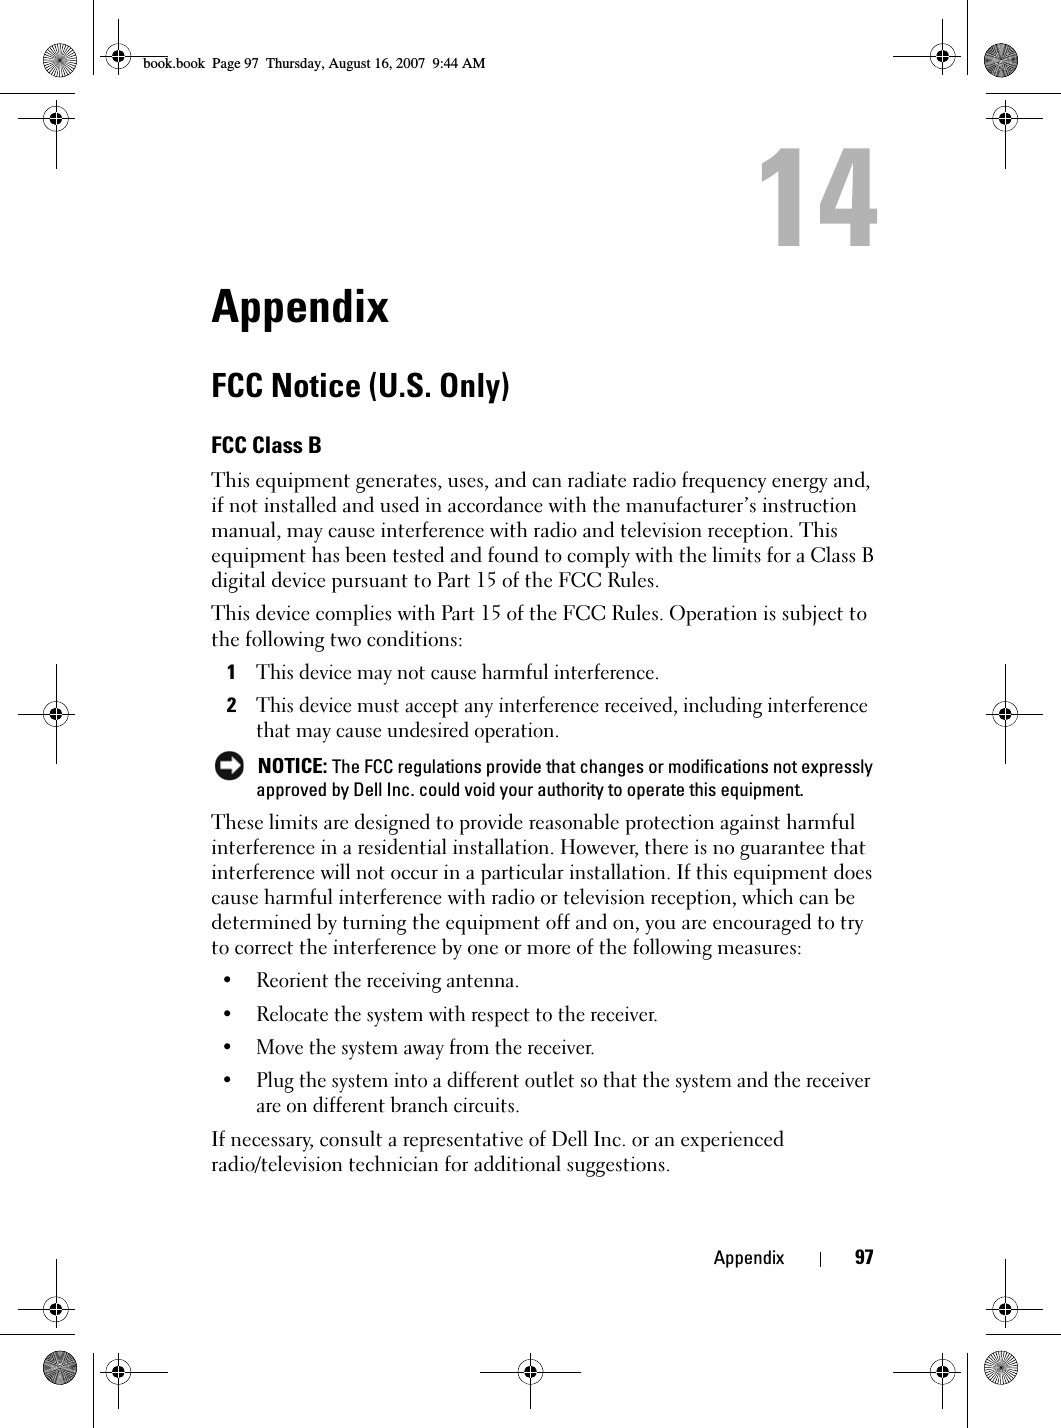 Appendix 97AppendixFCC Notice (U.S. Only)FCC Class BThis equipment generates, uses, and can radiate radio frequency energy and, if not installed and used in accordance with the manufacturer’s instruction manual, may cause interference with radio and television reception. This equipment has been tested and found to comply with the limits for a Class B digital device pursuant to Part 15 of the FCC Rules. This device complies with Part 15 of the FCC Rules. Operation is subject to the following two conditions: 1This device may not cause harmful interference. 2This device must accept any interference received, including interference that may cause undesired operation.  NOTICE: The FCC regulations provide that changes or modifications not expressly approved by Dell Inc. could void your authority to operate this equipment. These limits are designed to provide reasonable protection against harmful interference in a residential installation. However, there is no guarantee that interference will not occur in a particular installation. If this equipment does cause harmful interference with radio or television reception, which can be determined by turning the equipment off and on, you are encouraged to try to correct the interference by one or more of the following measures: • Reorient the receiving antenna.• Relocate the system with respect to the receiver.• Move the system away from the receiver.• Plug the system into a different outlet so that the system and the receiver are on different branch circuits. If necessary, consult a representative of Dell Inc. or an experienced radio/television technician for additional suggestions. book.book  Page 97  Thursday, August 16, 2007  9:44 AM